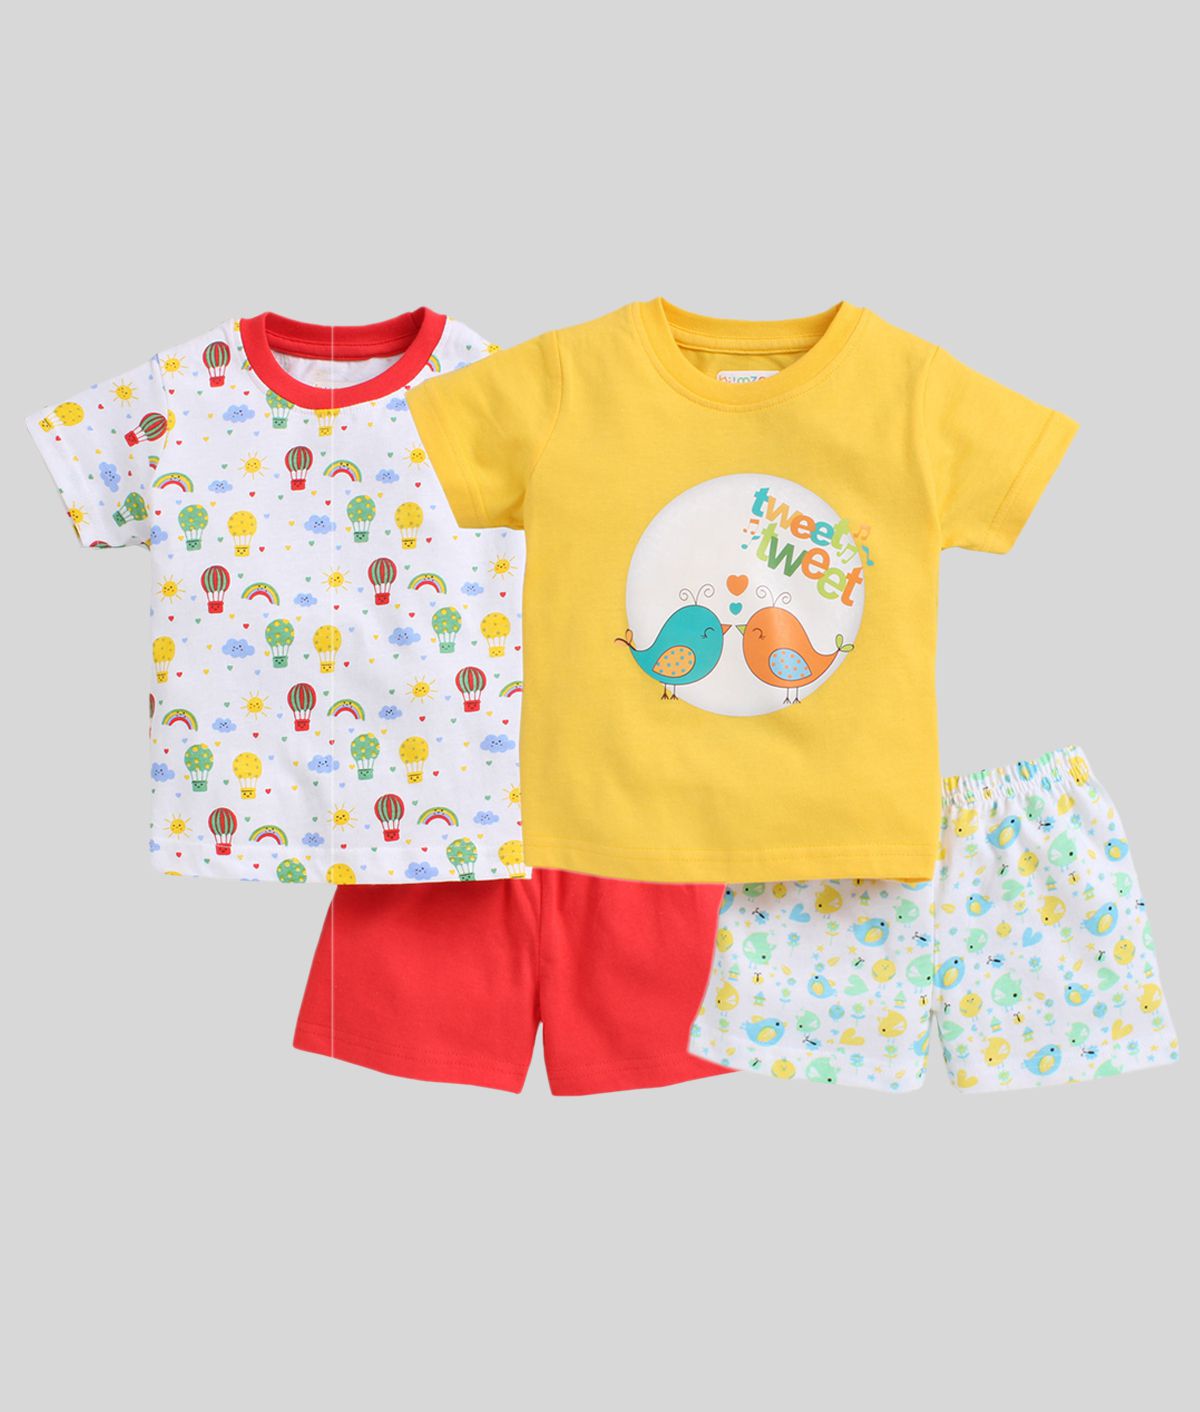     			BUMZEE Red & Yellow Baby Girls T-Shirt & Shorts Set Pack of 2 Age - 3-6 Months